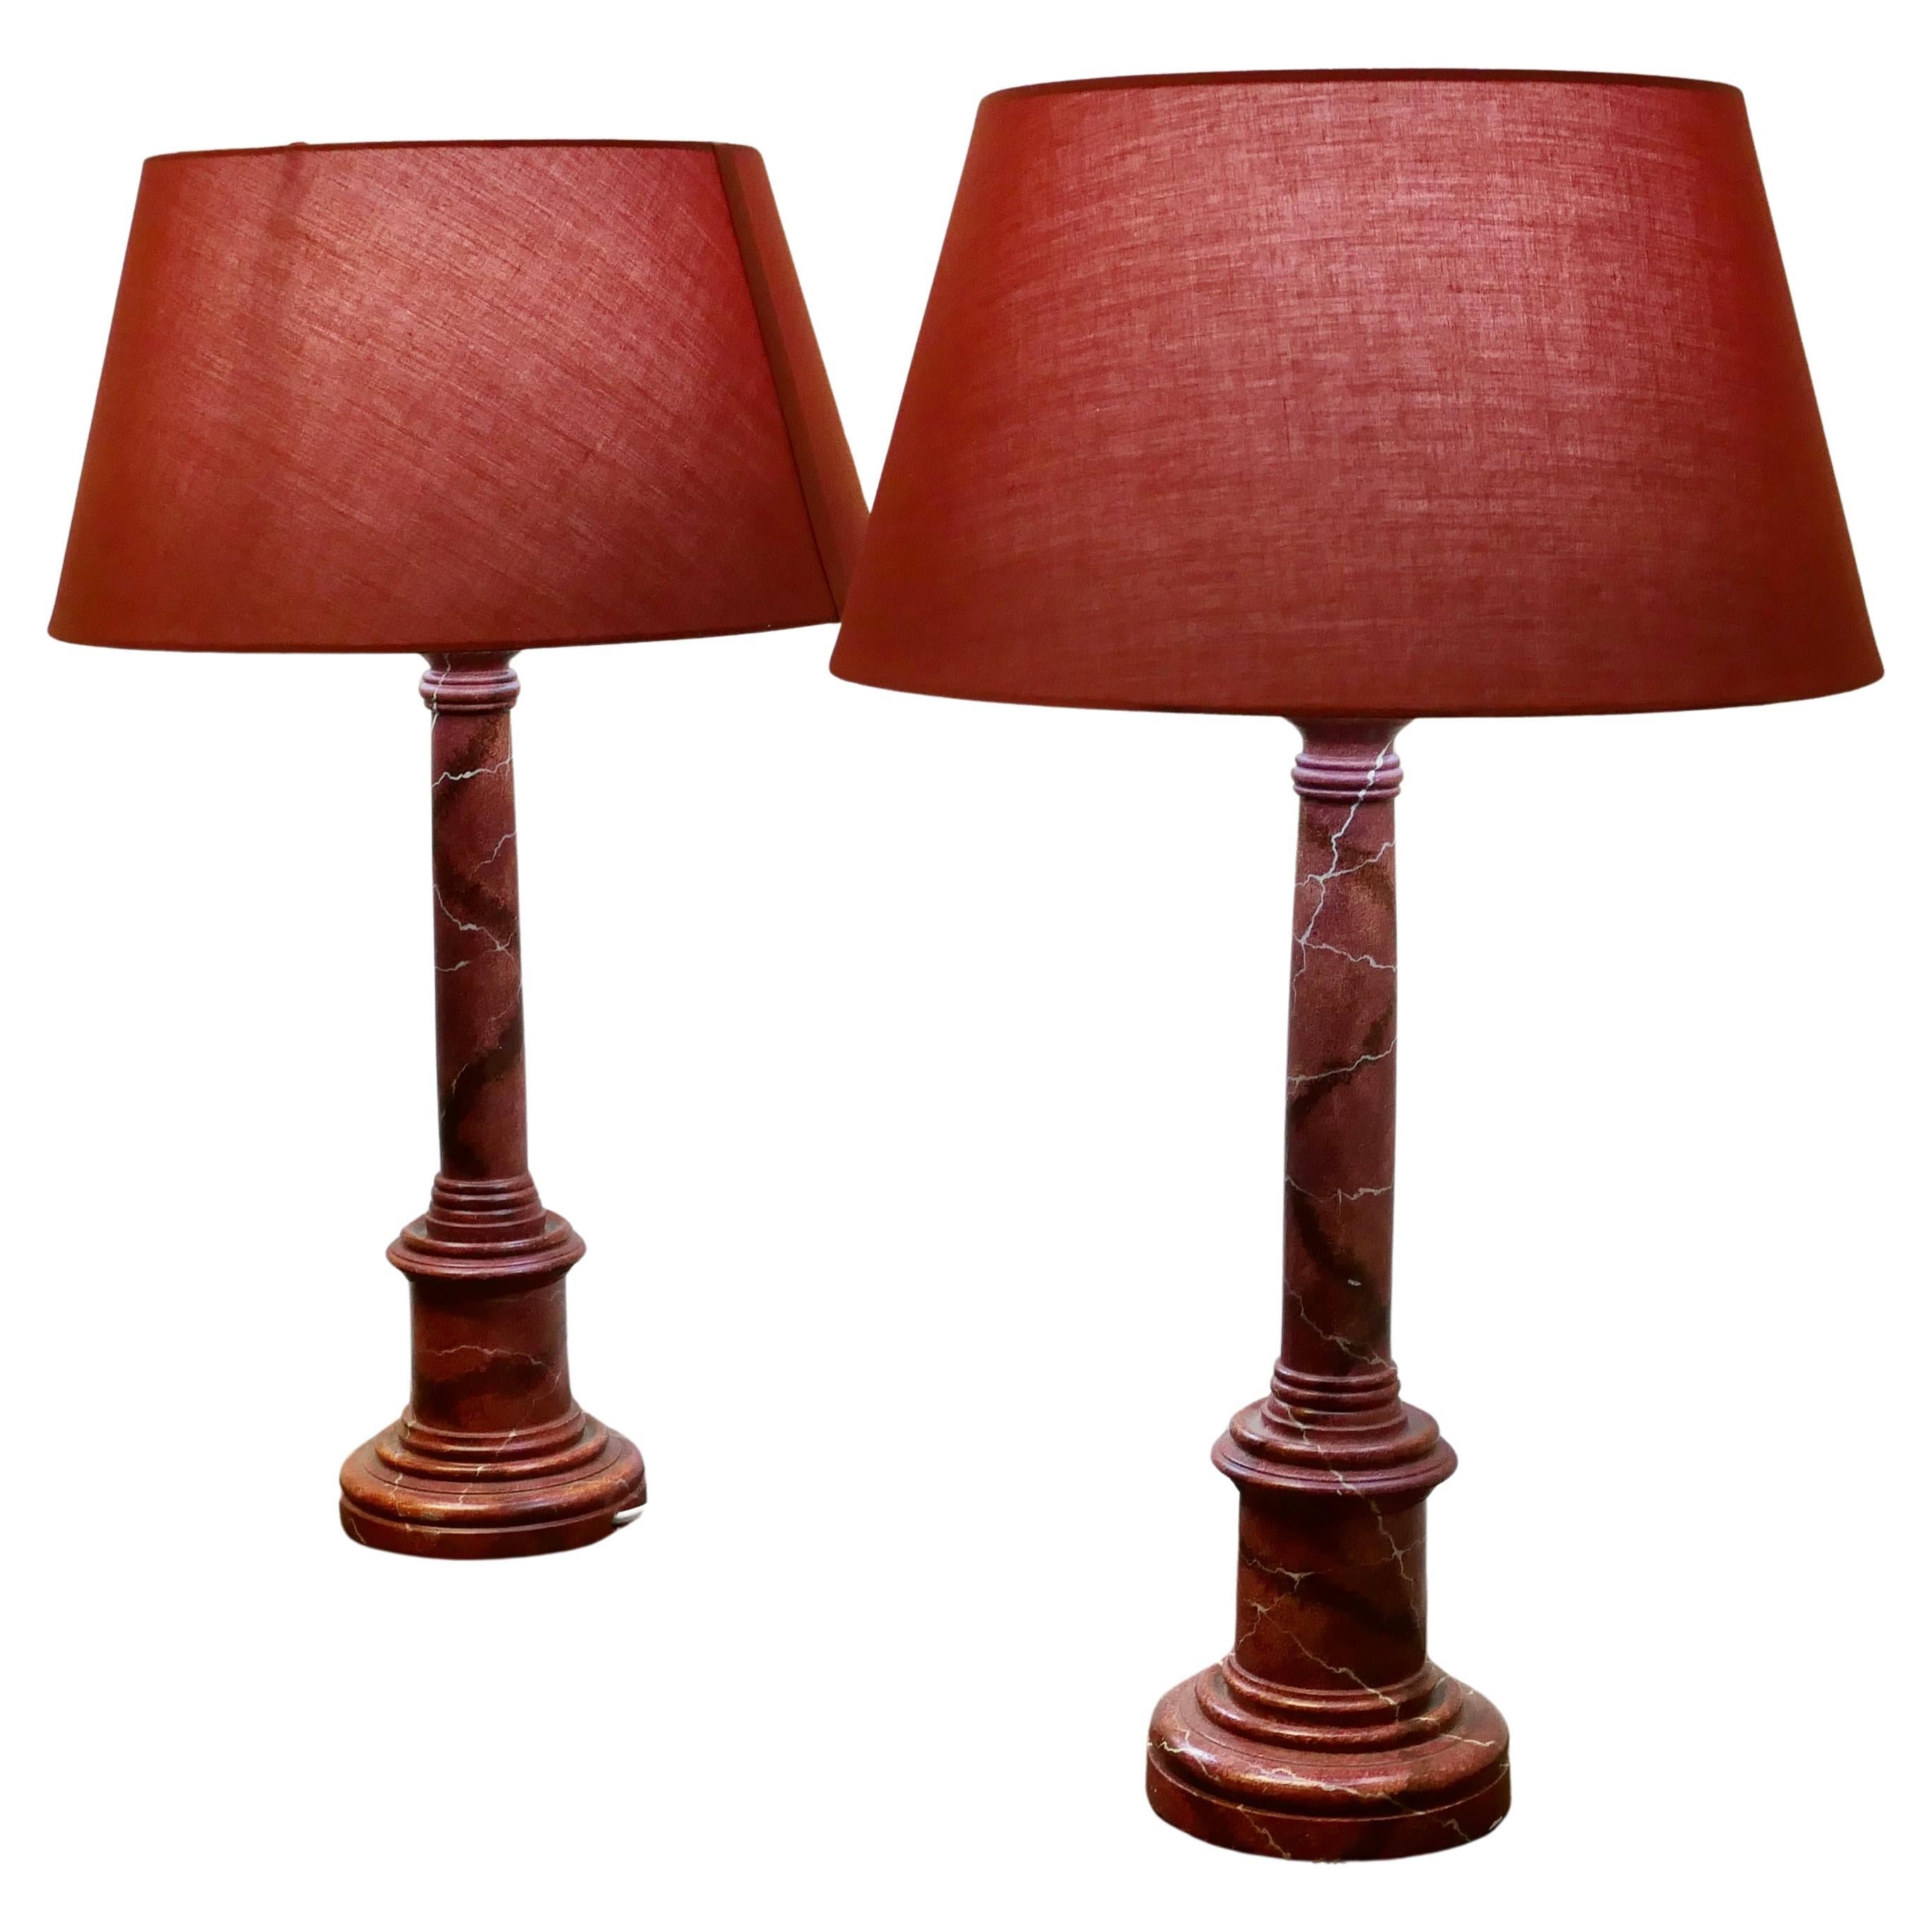 A Pair of Tall Simulated Marble Bedside Lamps with Shades    For Sale